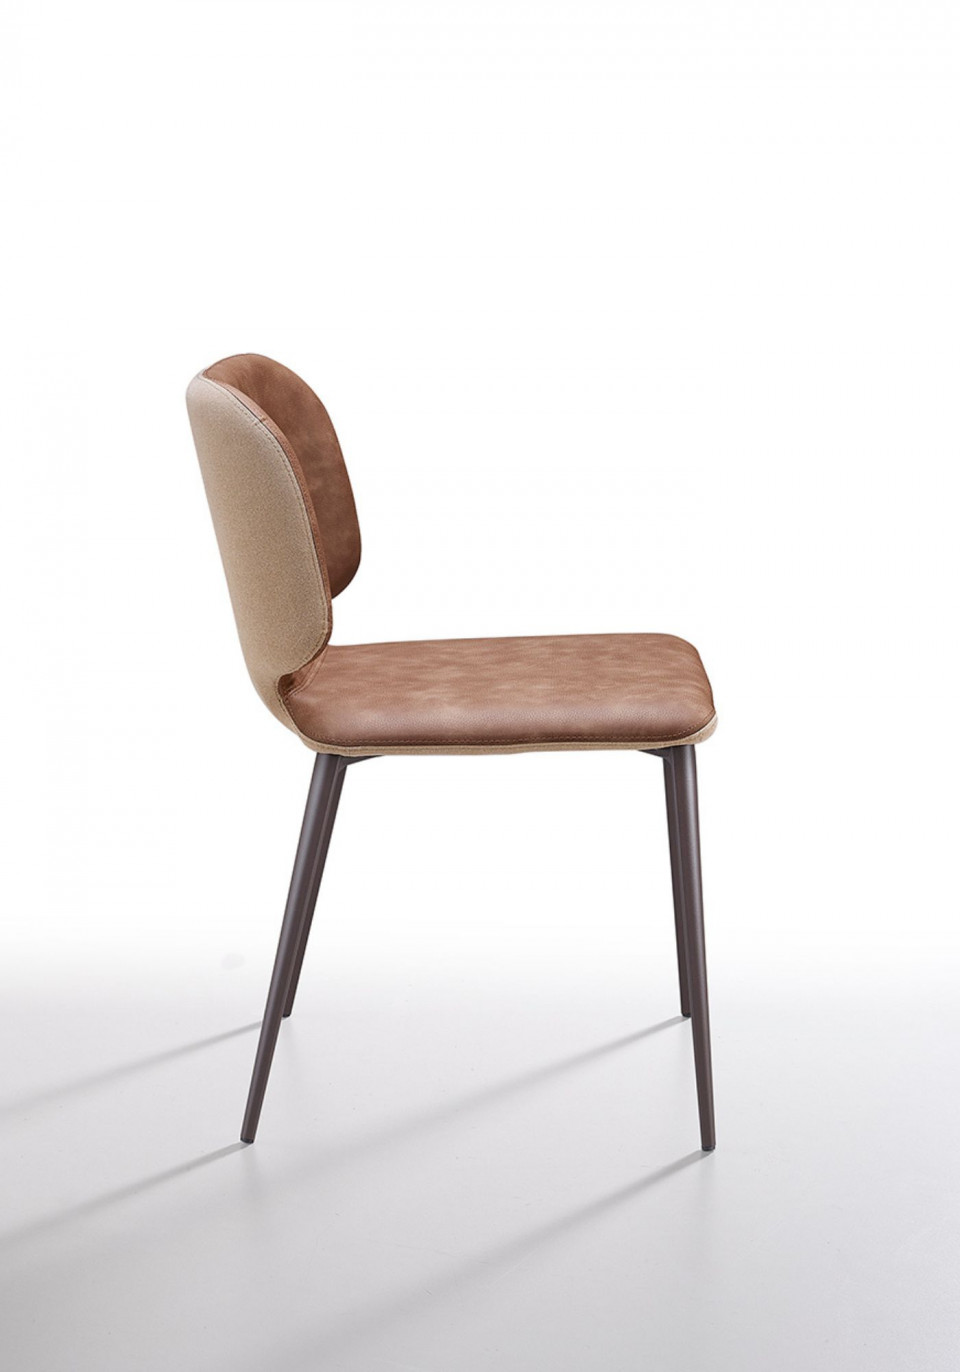 Wrap chair by midj